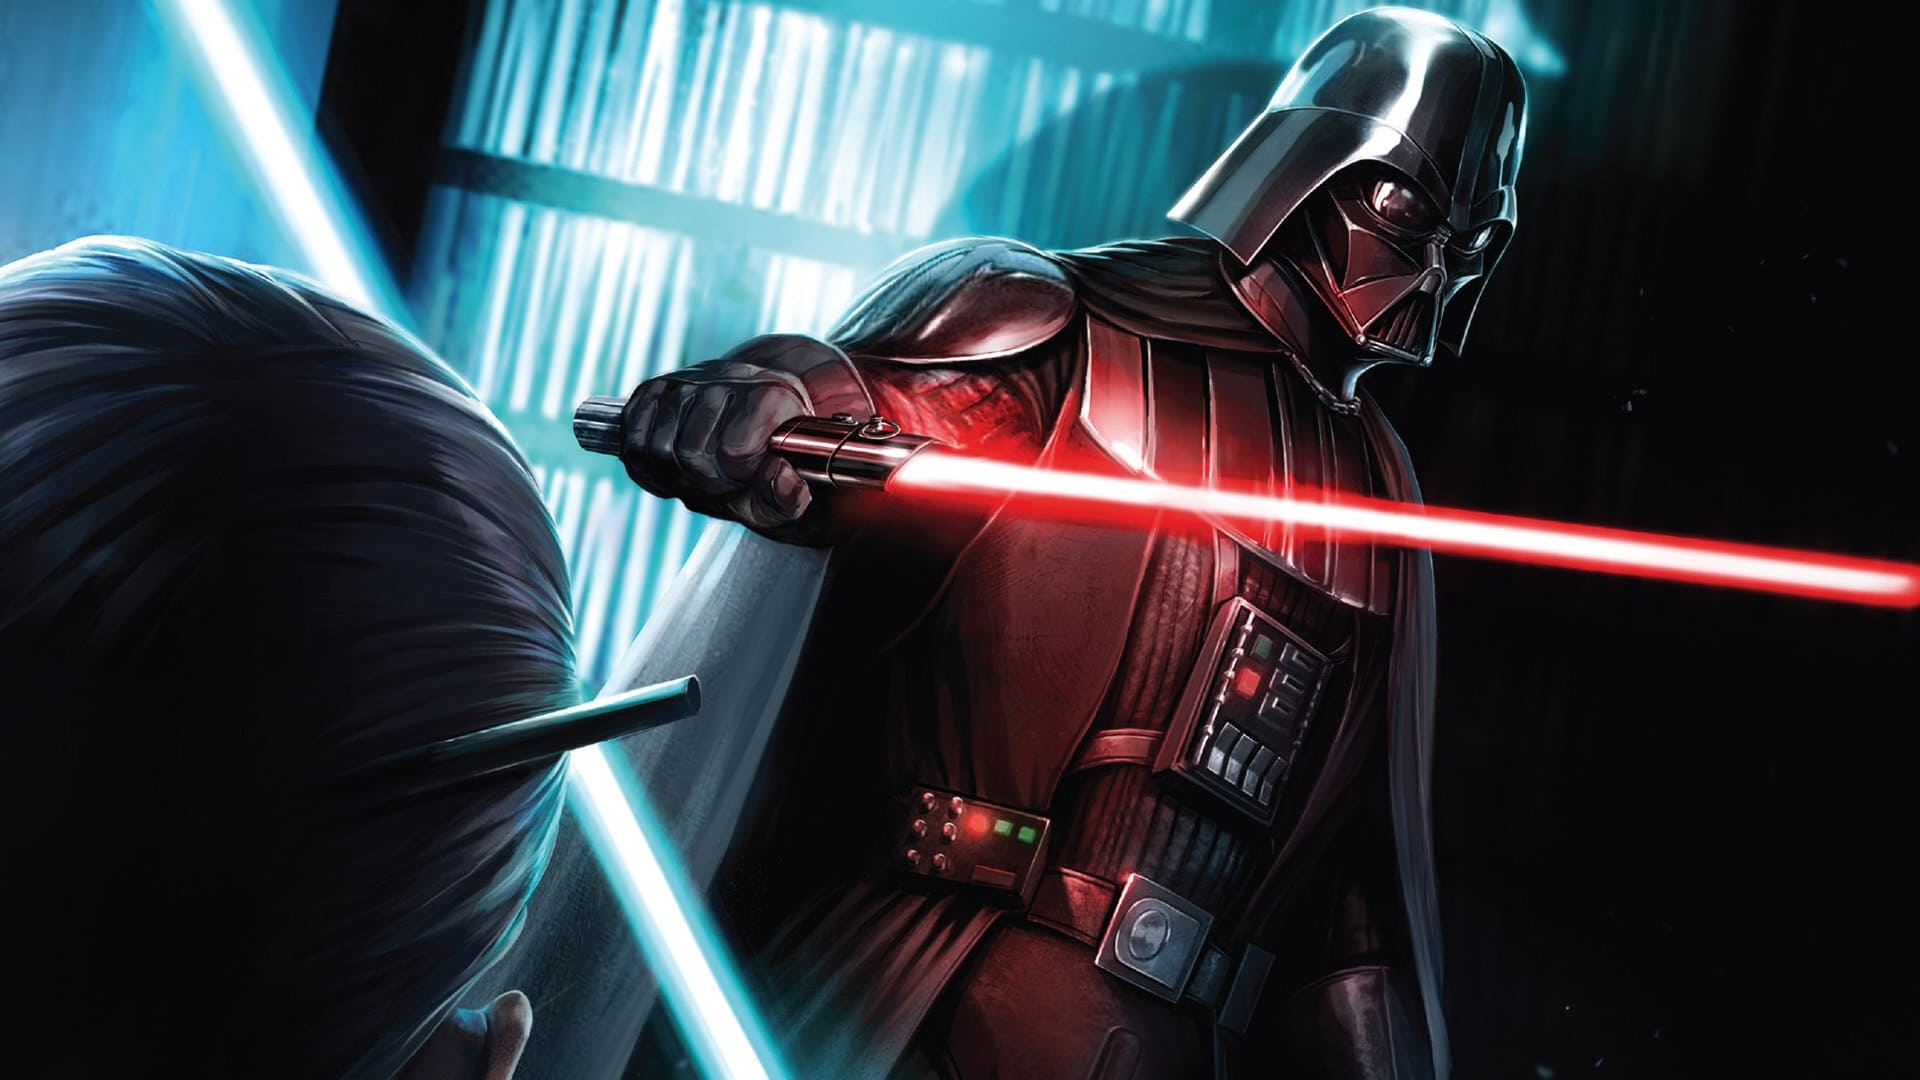 Darth Vader: Ultimately sacrificed himself to save his son and defeat the Emperor. 1920x1080 Full HD Wallpaper.